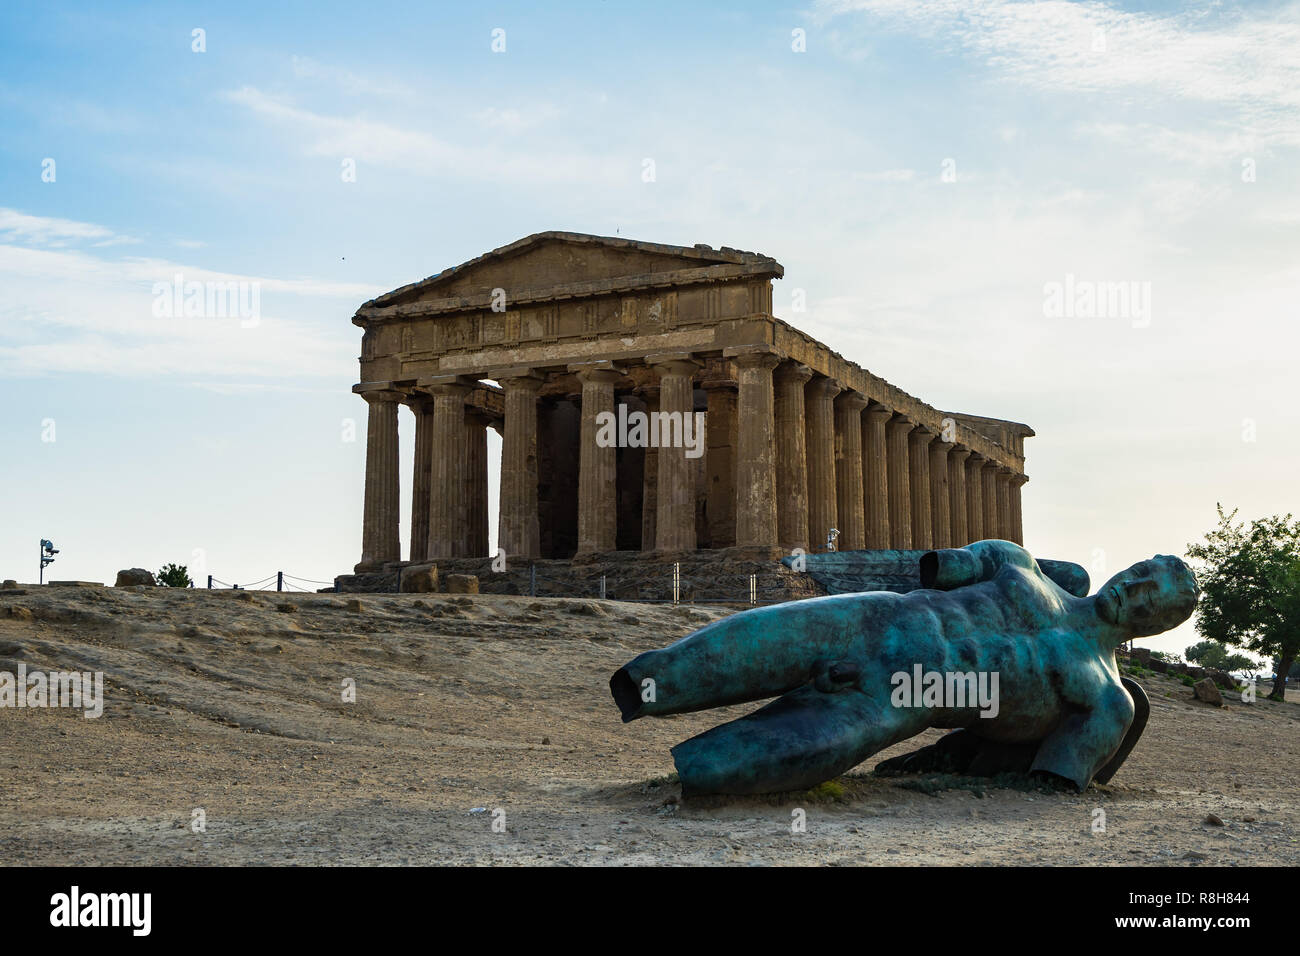 Icarus bronze statue near the Temple of Concordia at Valle dei Templi (Valley of the Temples), Agrigento, Sicily, Italy Stock Photo